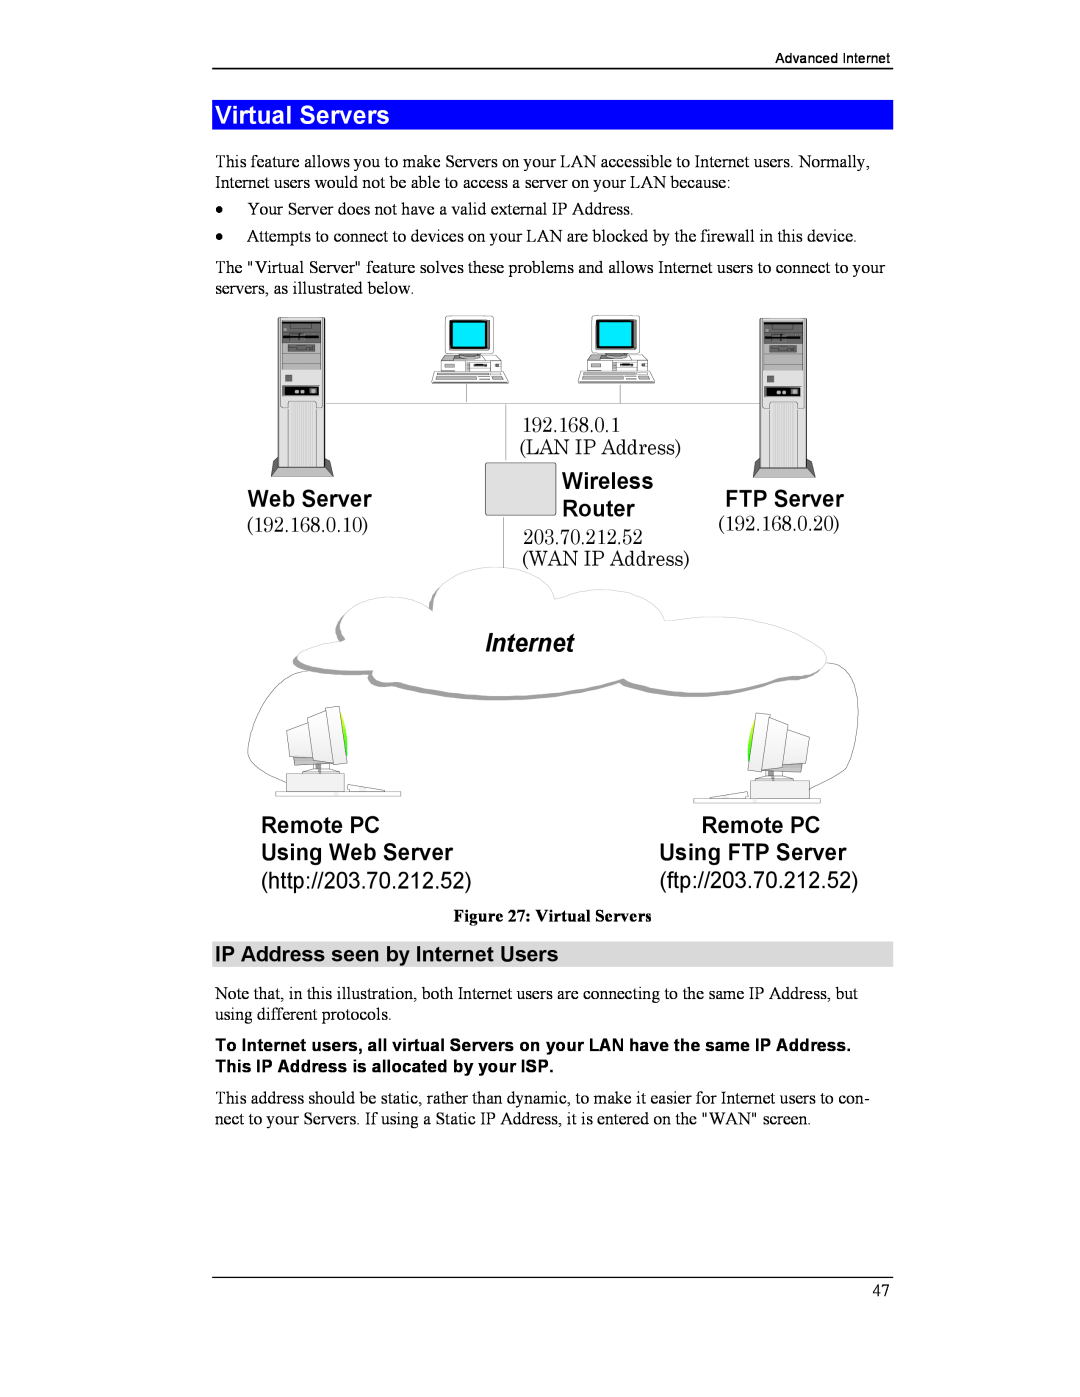 CNET CNWR-811P manual Virtual Servers, IP Address seen by Internet Users, Web Server, Wireless Router FTP Server, Remote PC 